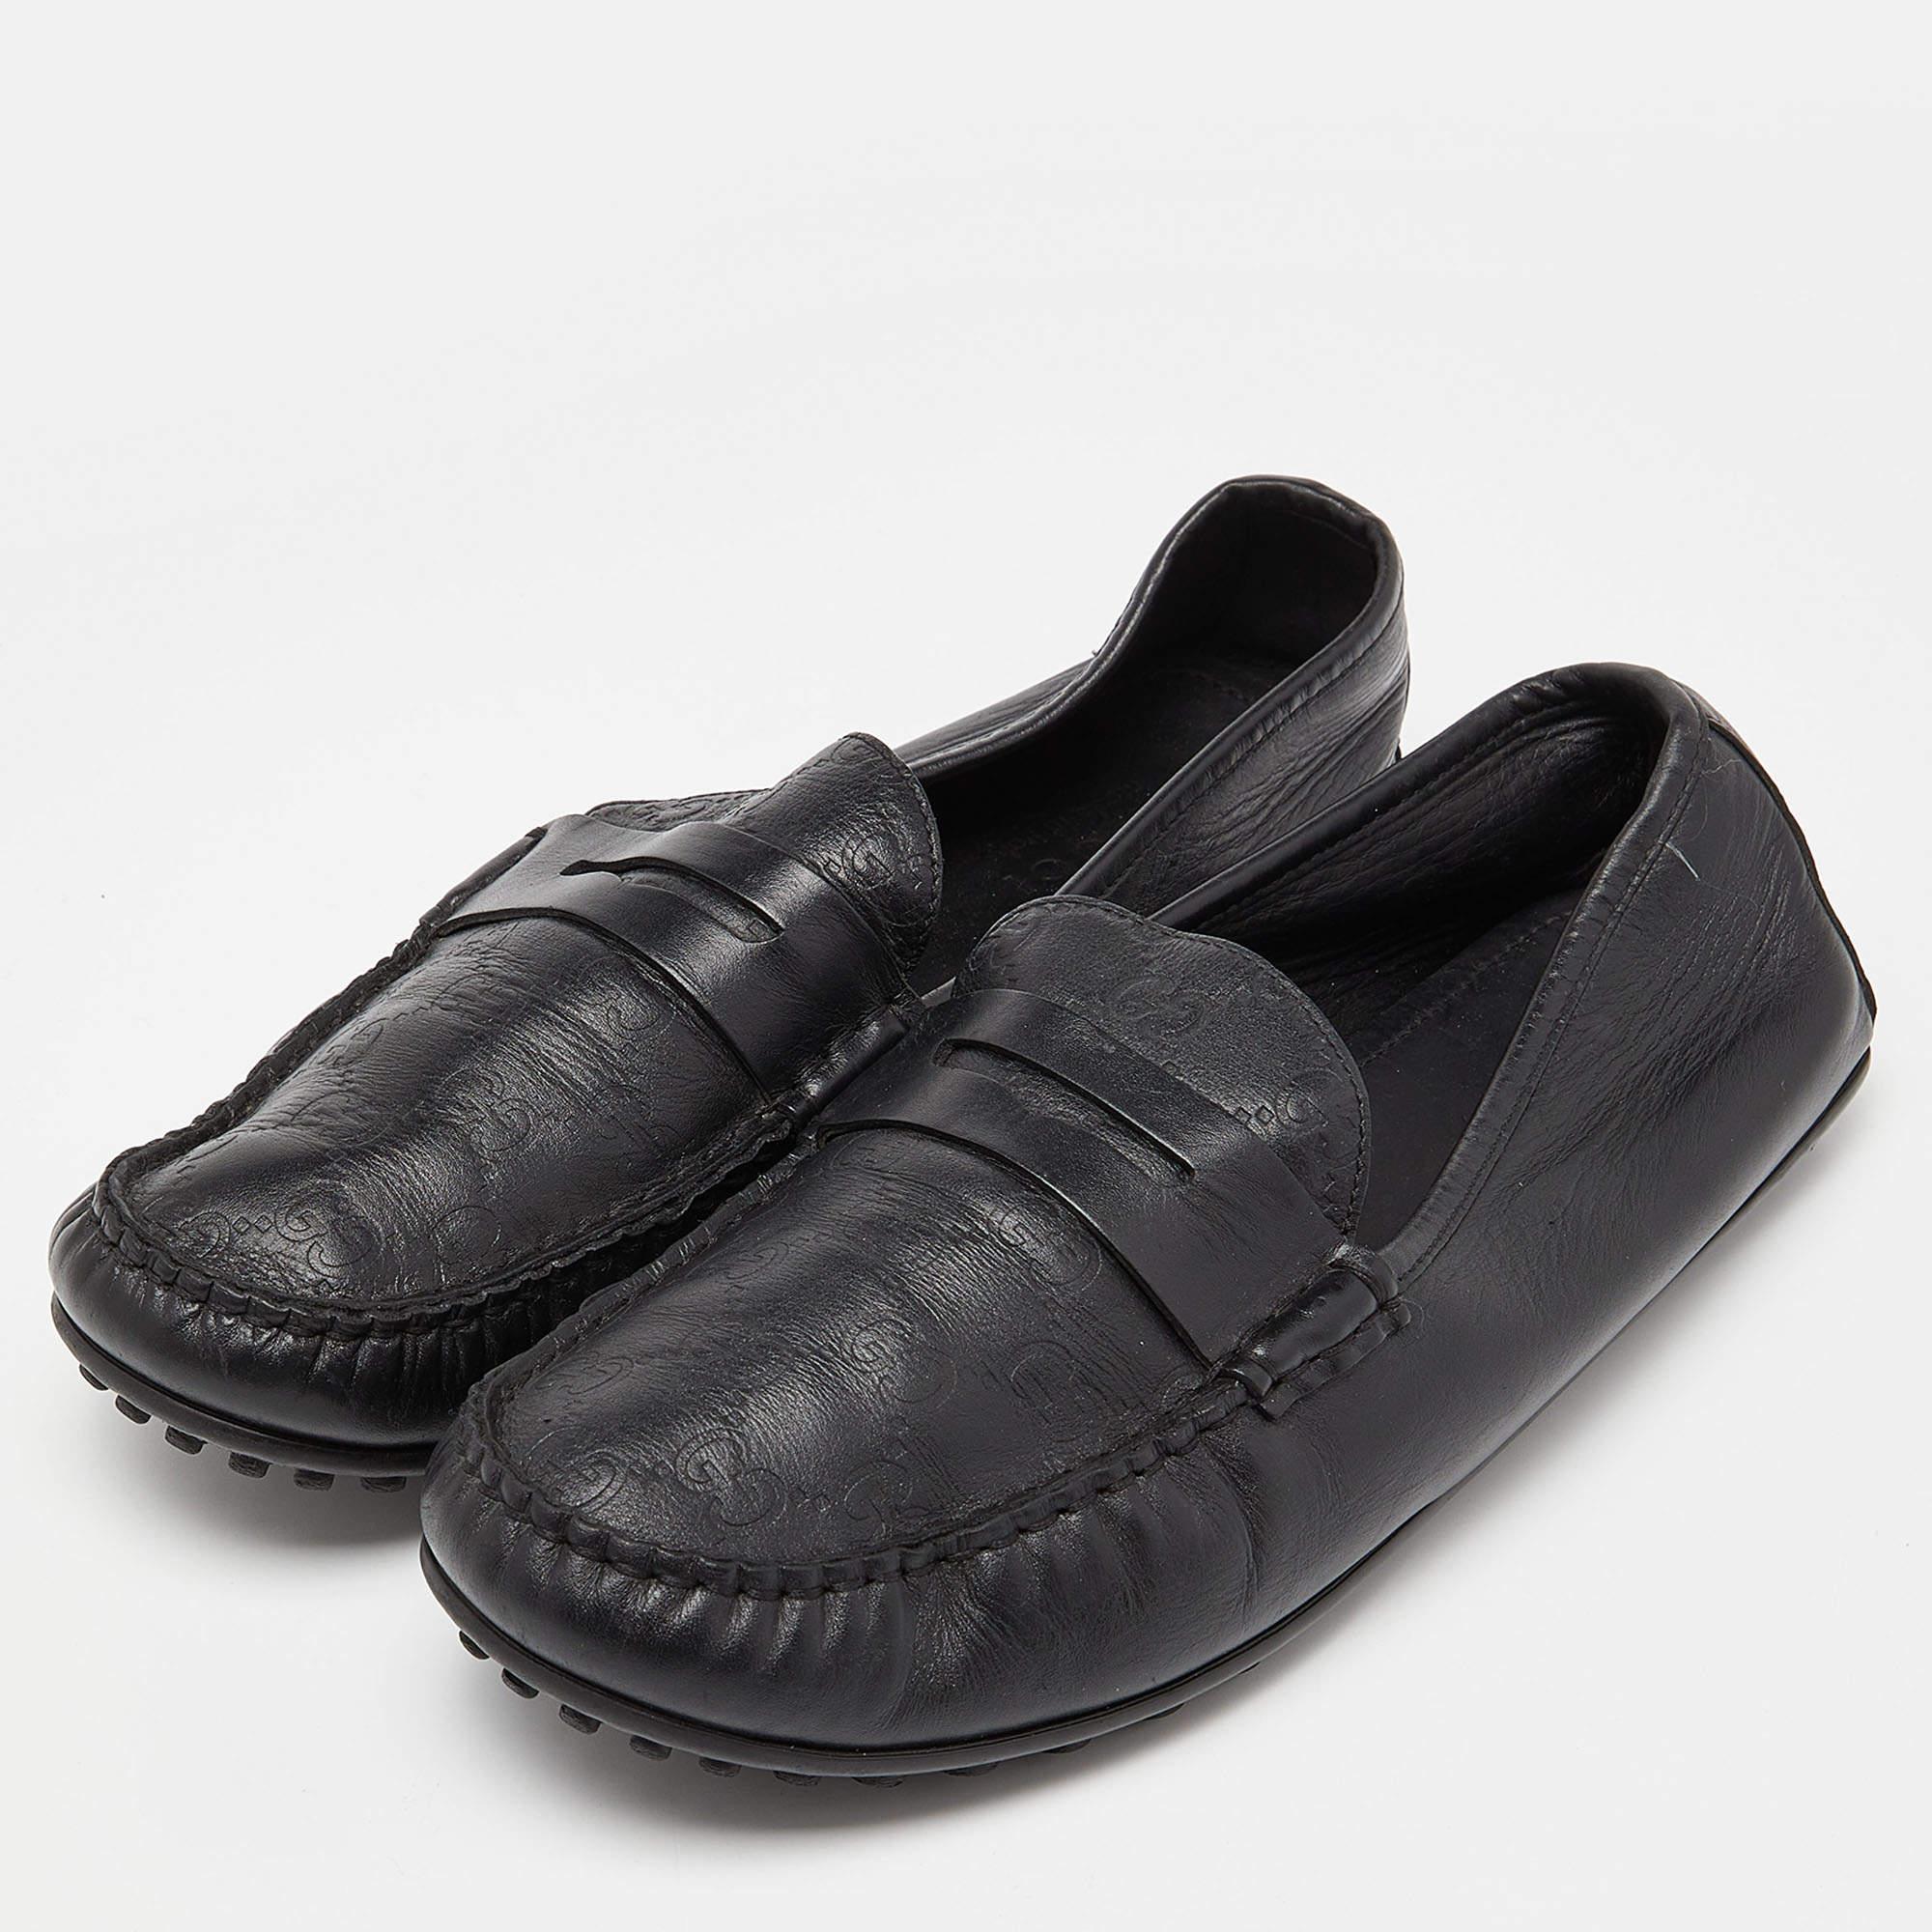 Practical, fashionable, and durable—these Gucci loafers are carefully built to be fine companions to your everyday style. They come made using the best materials to be a prized buy.

